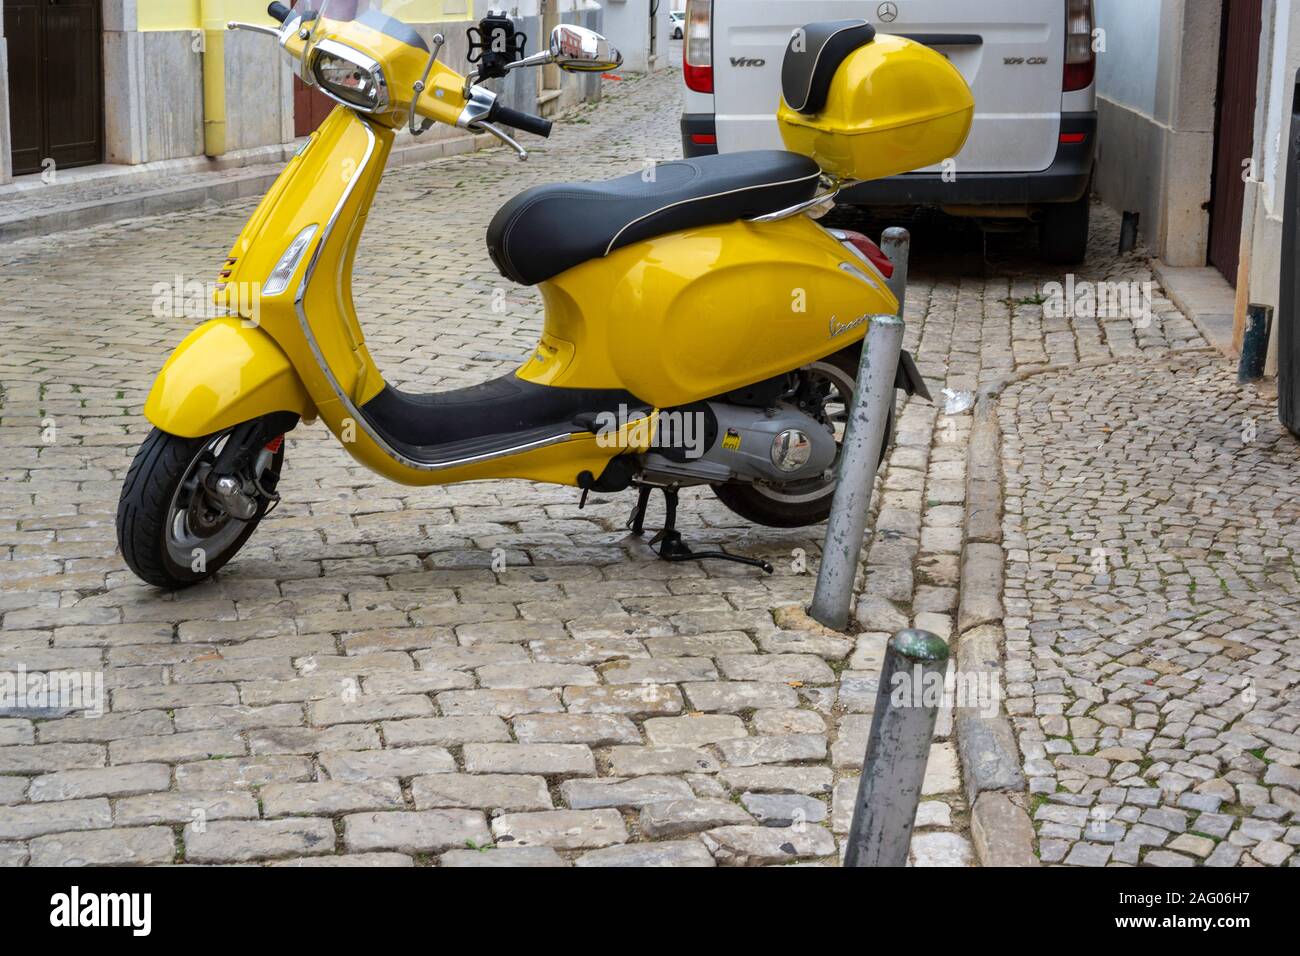 .A yellow Vespa motor scooter parked on a cobble stoned road in Loulé, Portugal Stock Photo